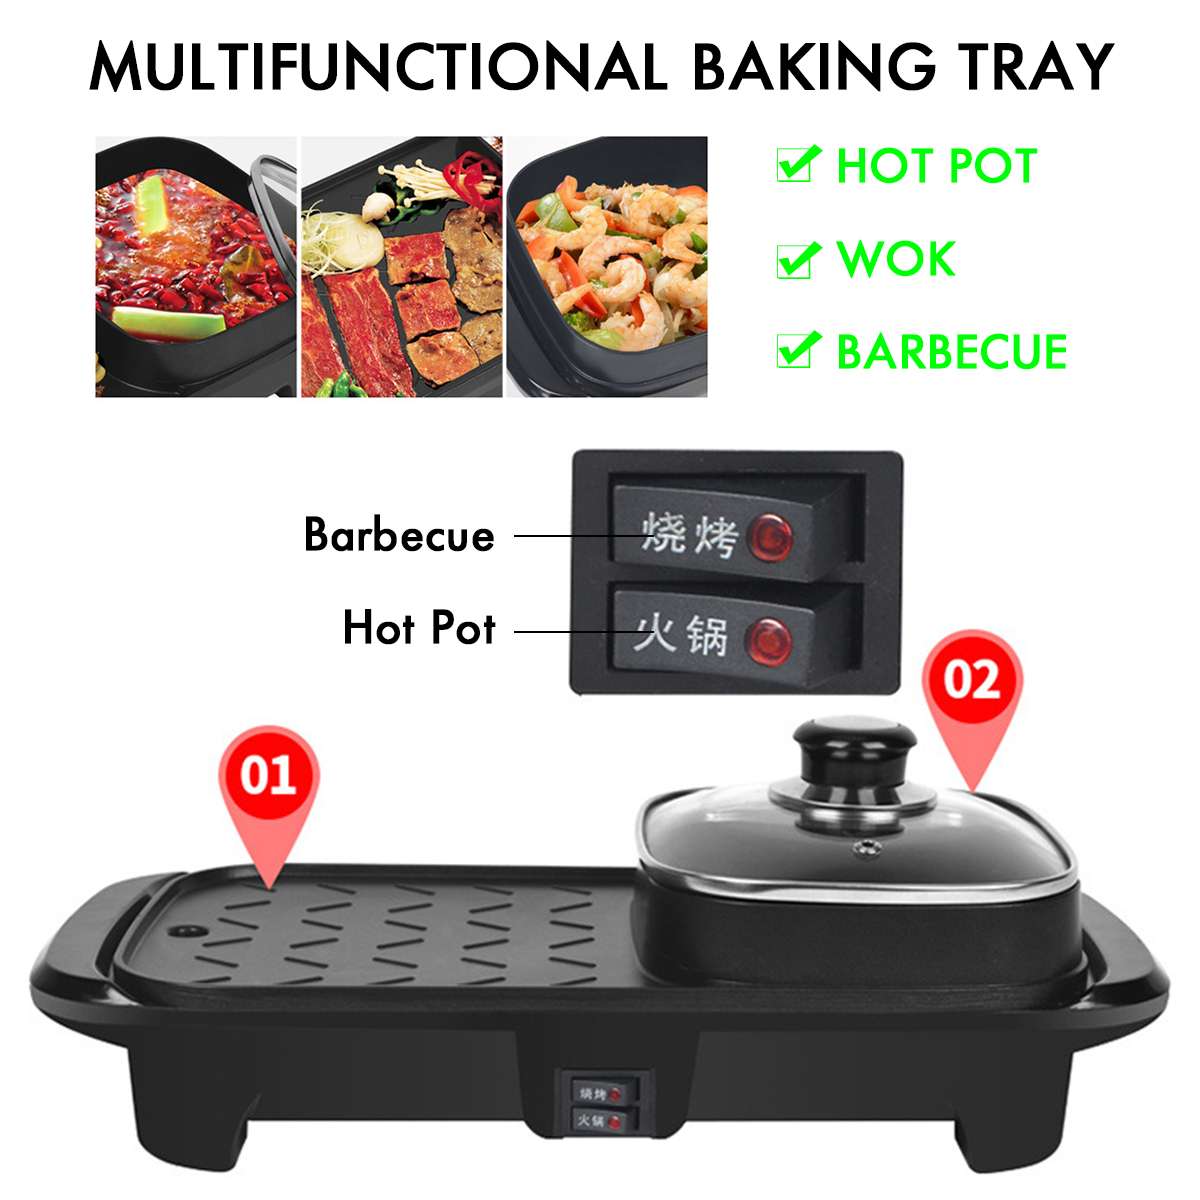 220V 2in1 Hot Pot and Electric Grill Indoor Baking Flat Pan Double-flavor Hotpot Smokeless Grill Barbecue Flat Griddle Non-stick